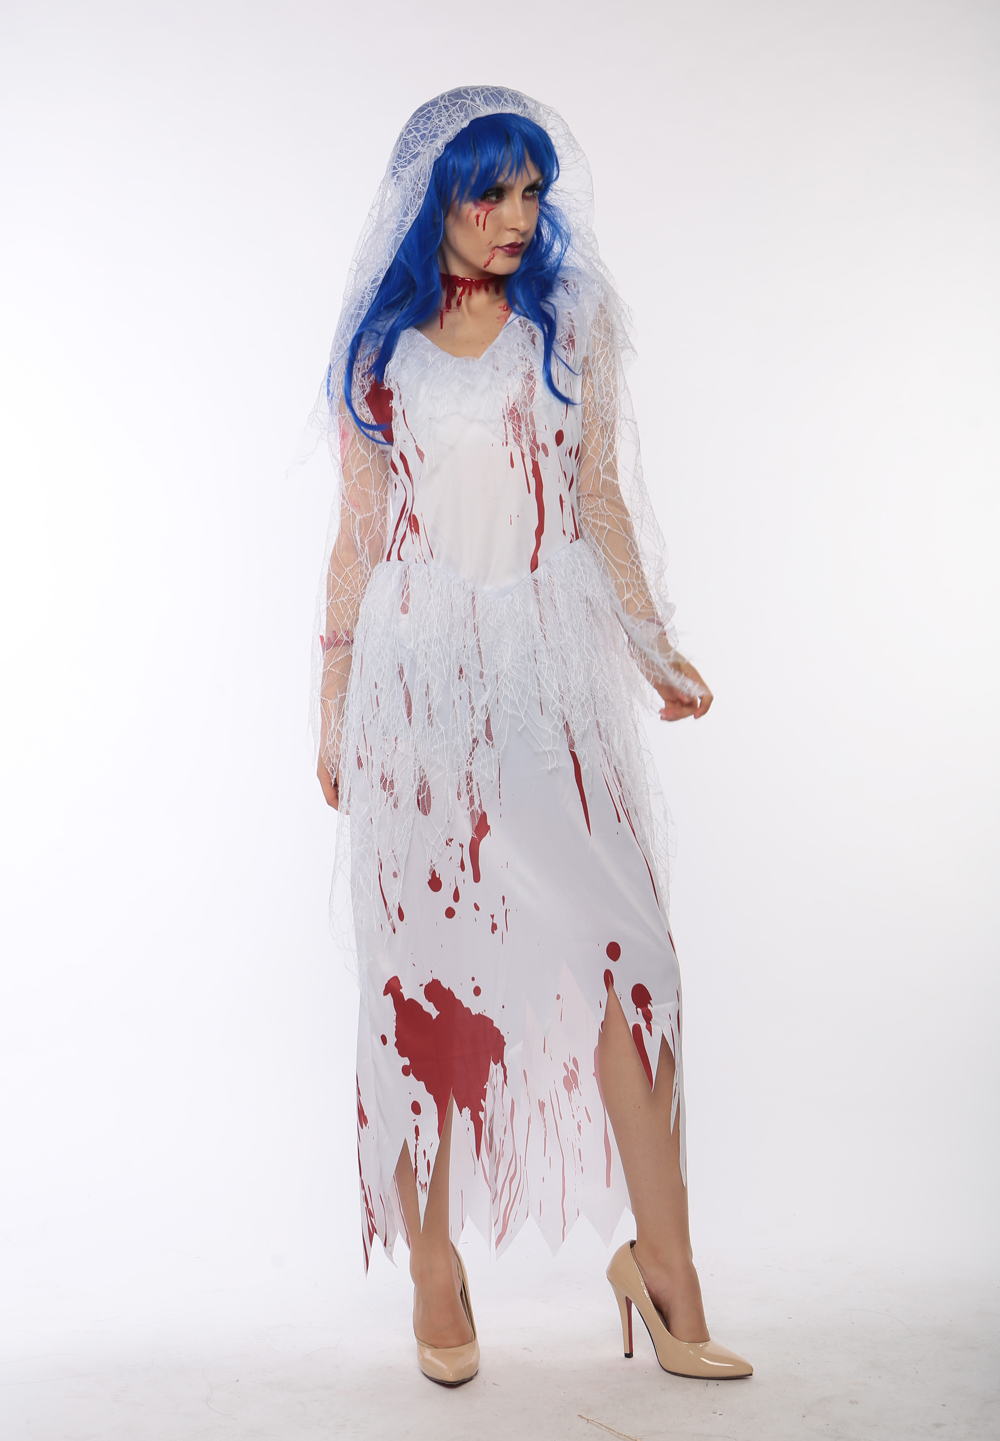 F1713 zombie long white bride costume,it comes with headwear,dress